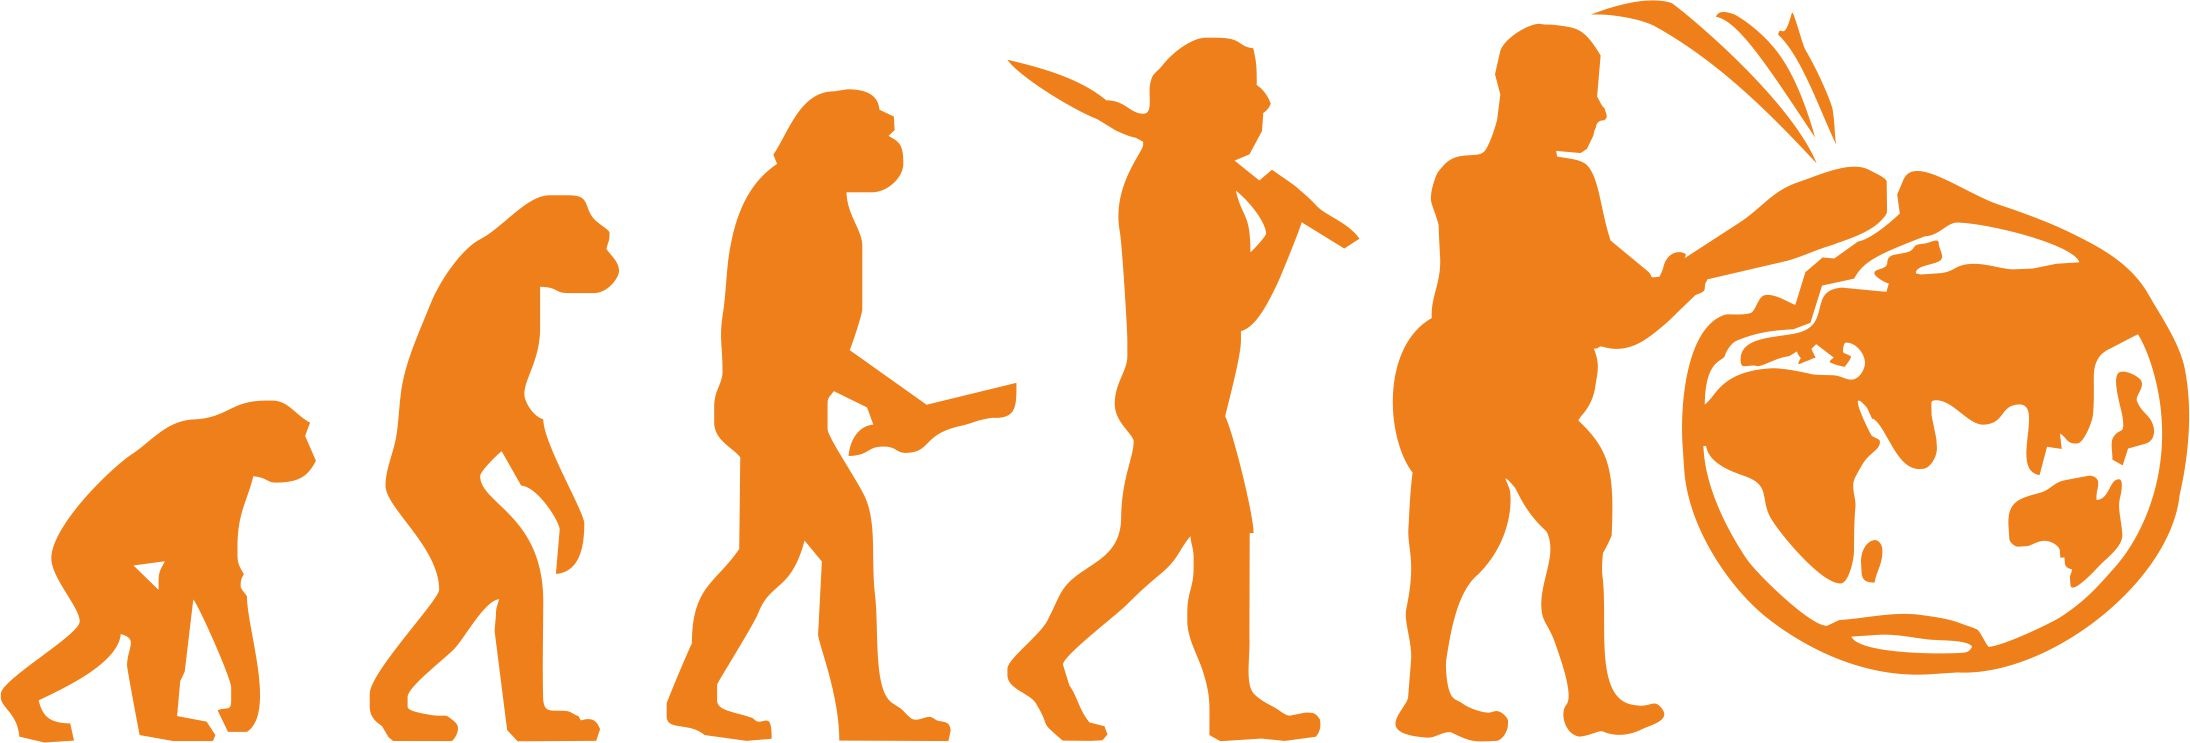 Graphic shows (from left to right) various primates getting more upright, then man with tools, spear, finally an obese man with a club smashing the planet Earth = Evolution Mess